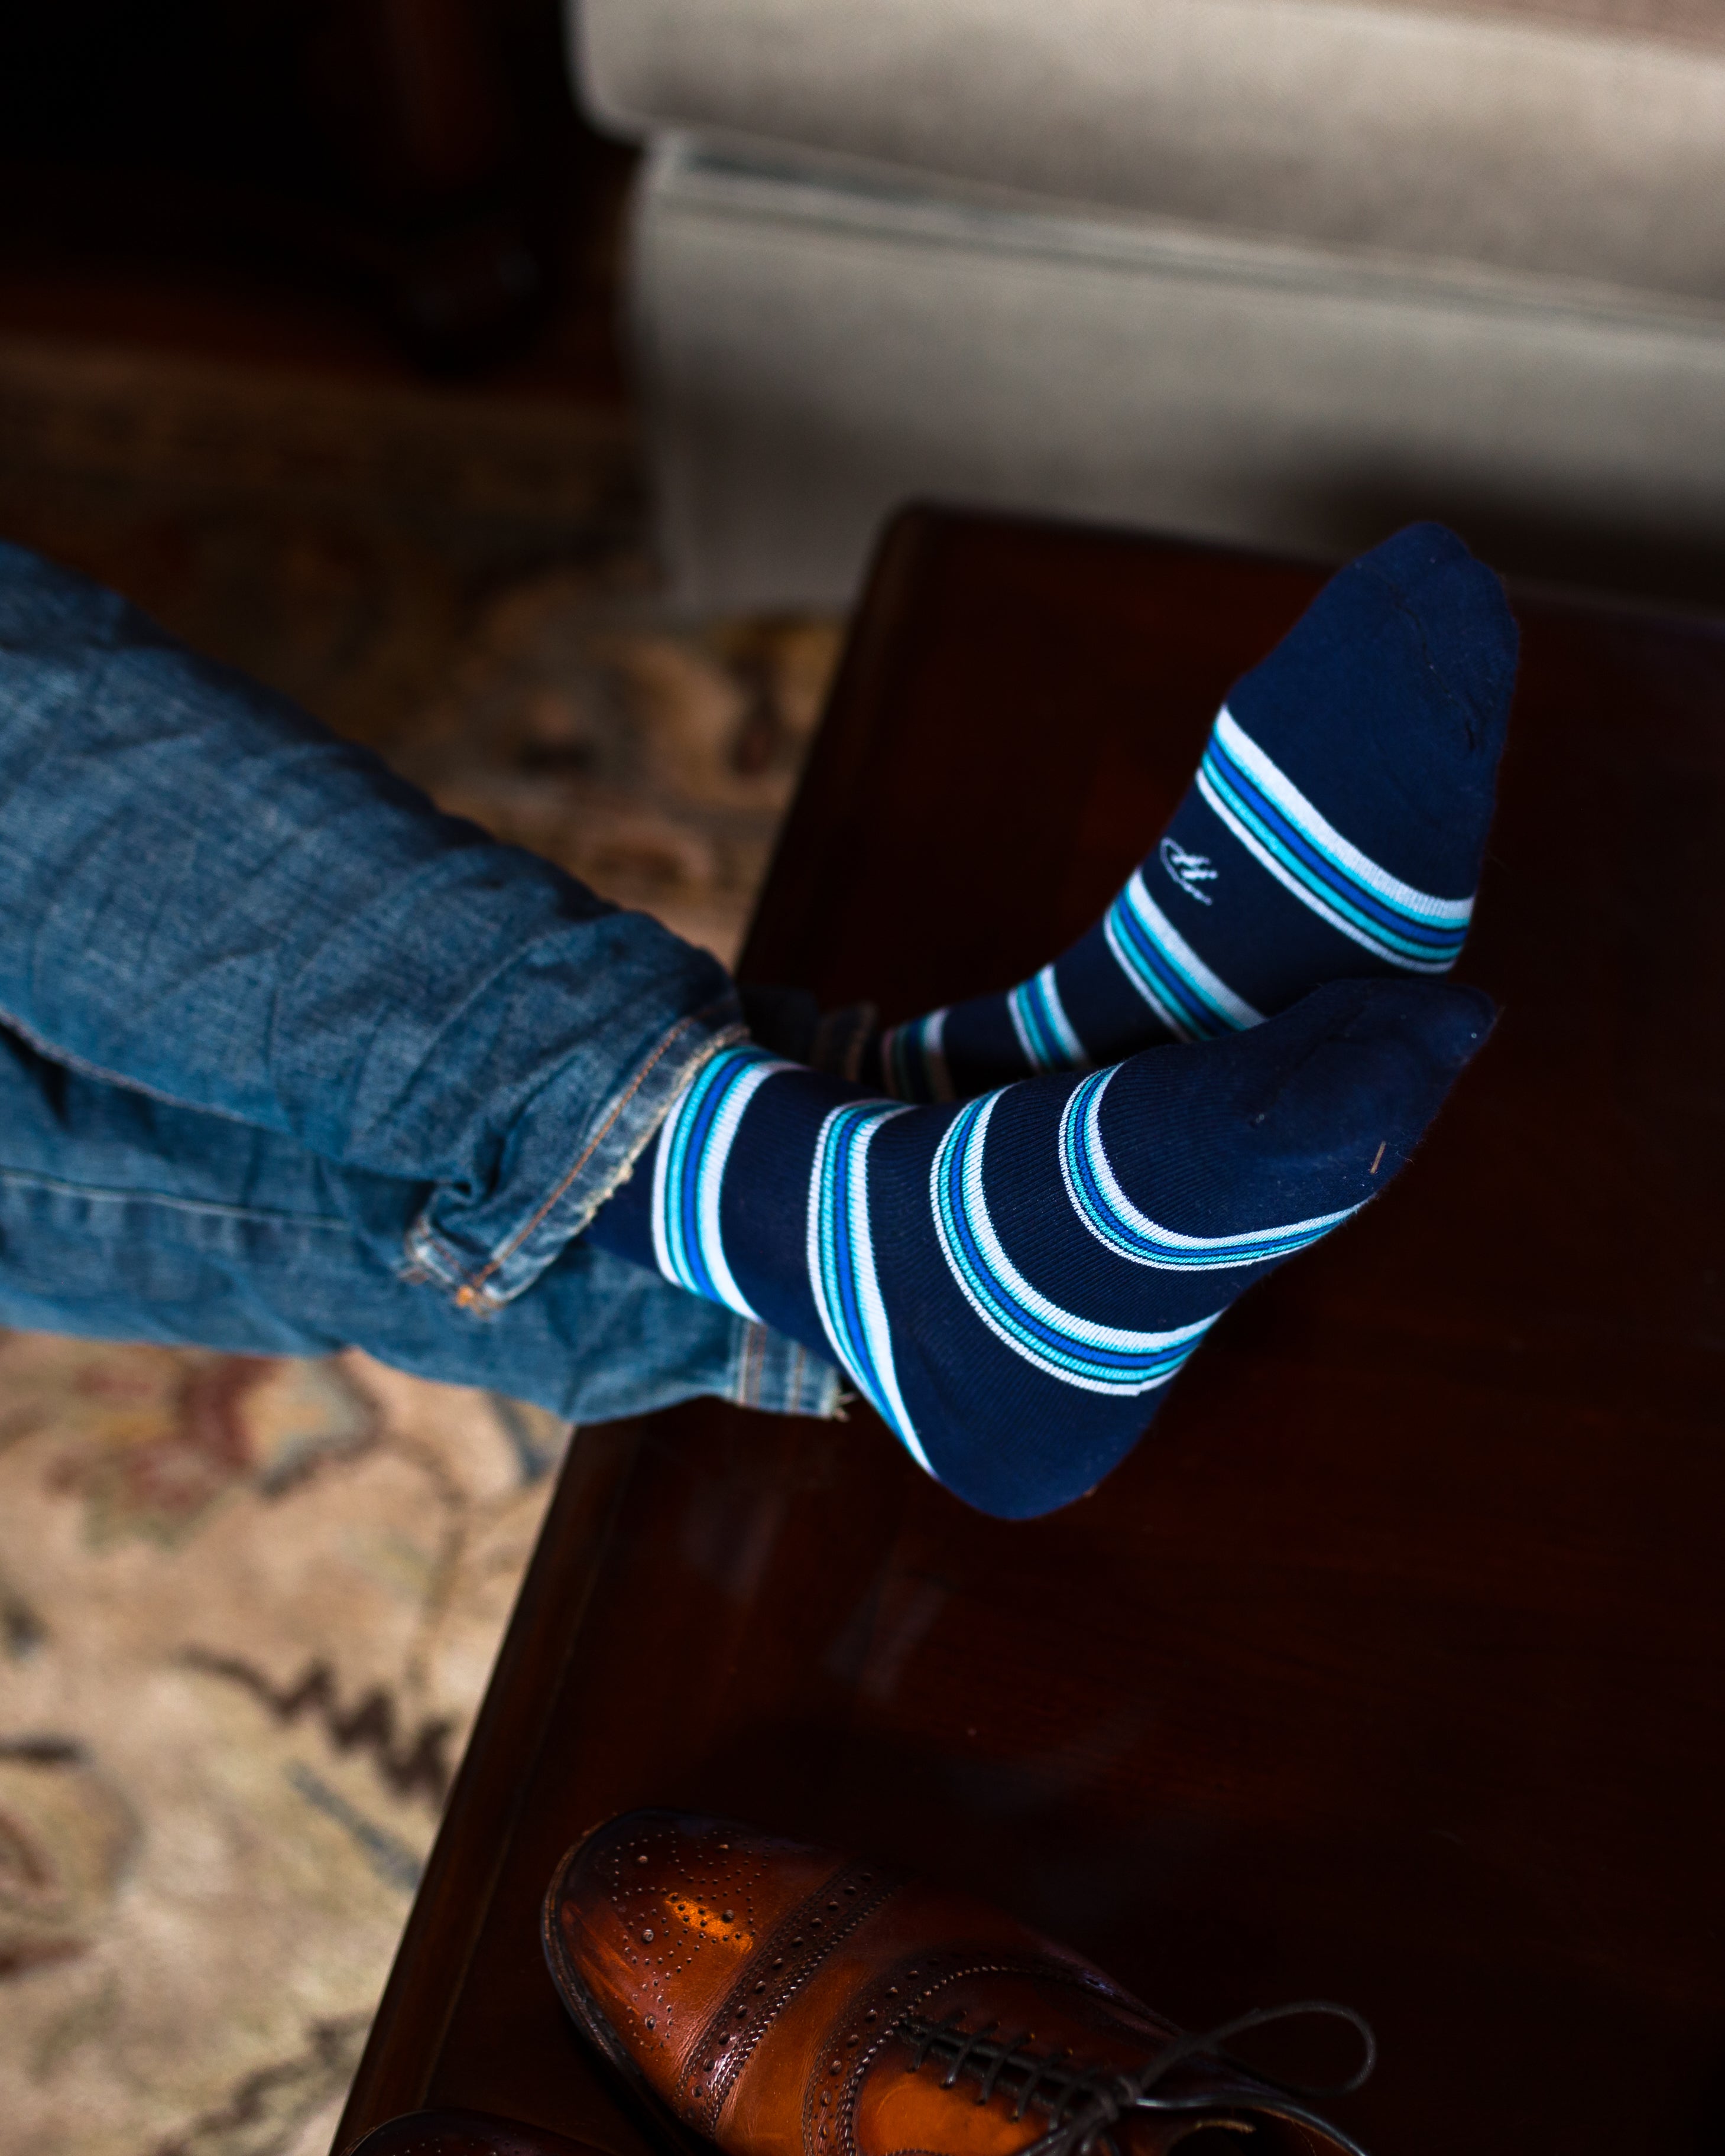 navy blue over the calf dress socks with blue aqua and white stripes, blue jeans, brown dress shoes